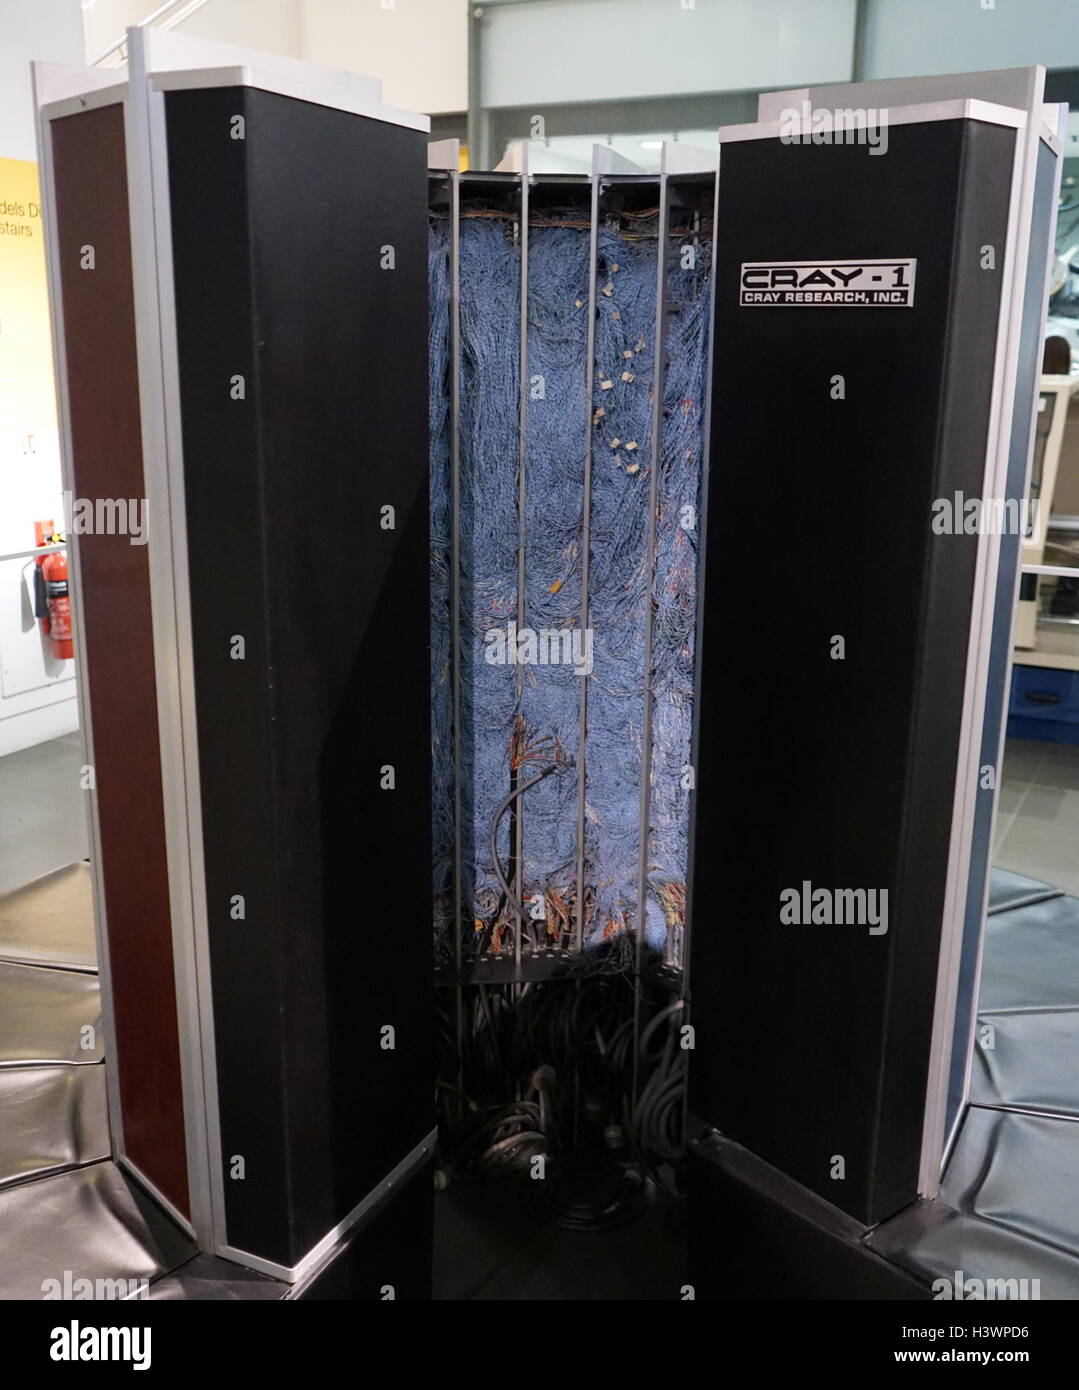 The Cray-1A Supercomputer, designed, manufactured and marketed by Chief engineer Seymour Cray (1925-1996) of Cray Research. Dated 20th Century Stock Photo